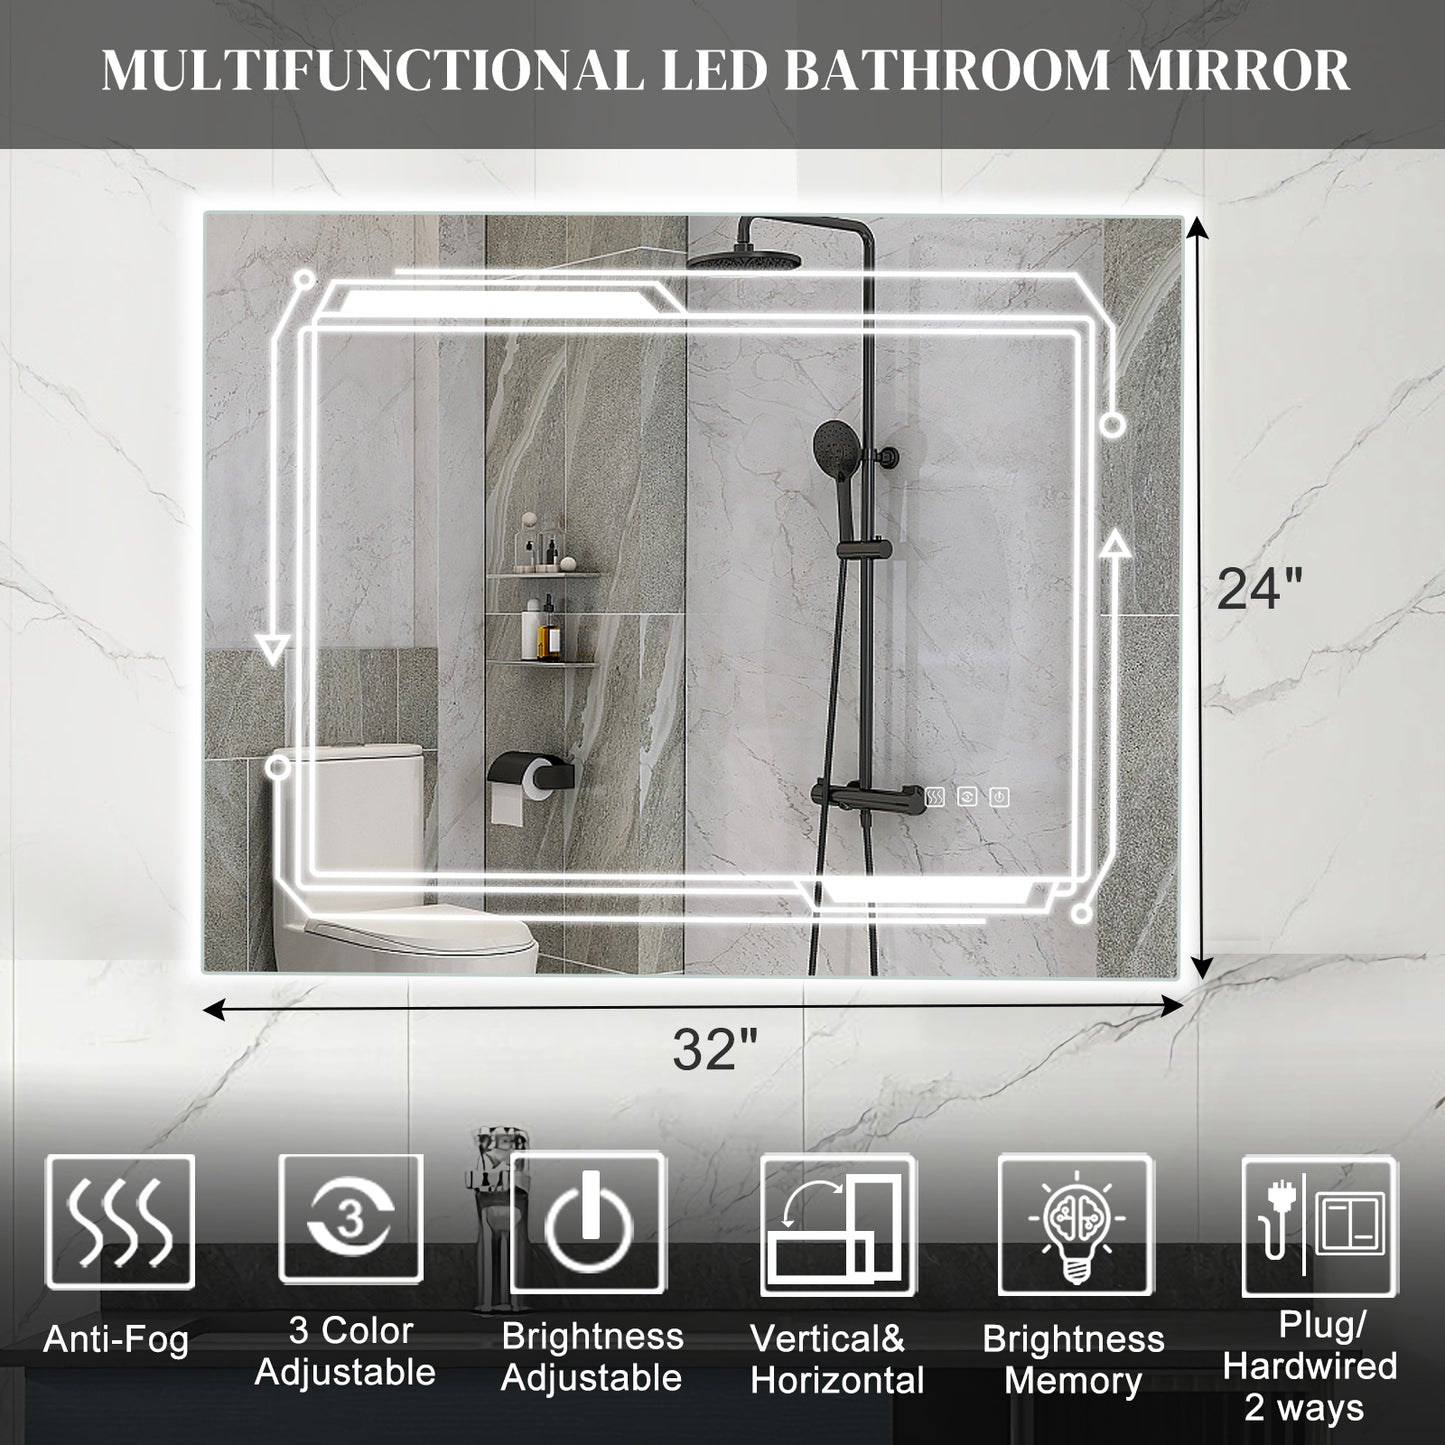 FCH 32*24in Geometric Elements Aluminum Alloy Rectangular Built-In Light Strip With Anti-Fog Touch